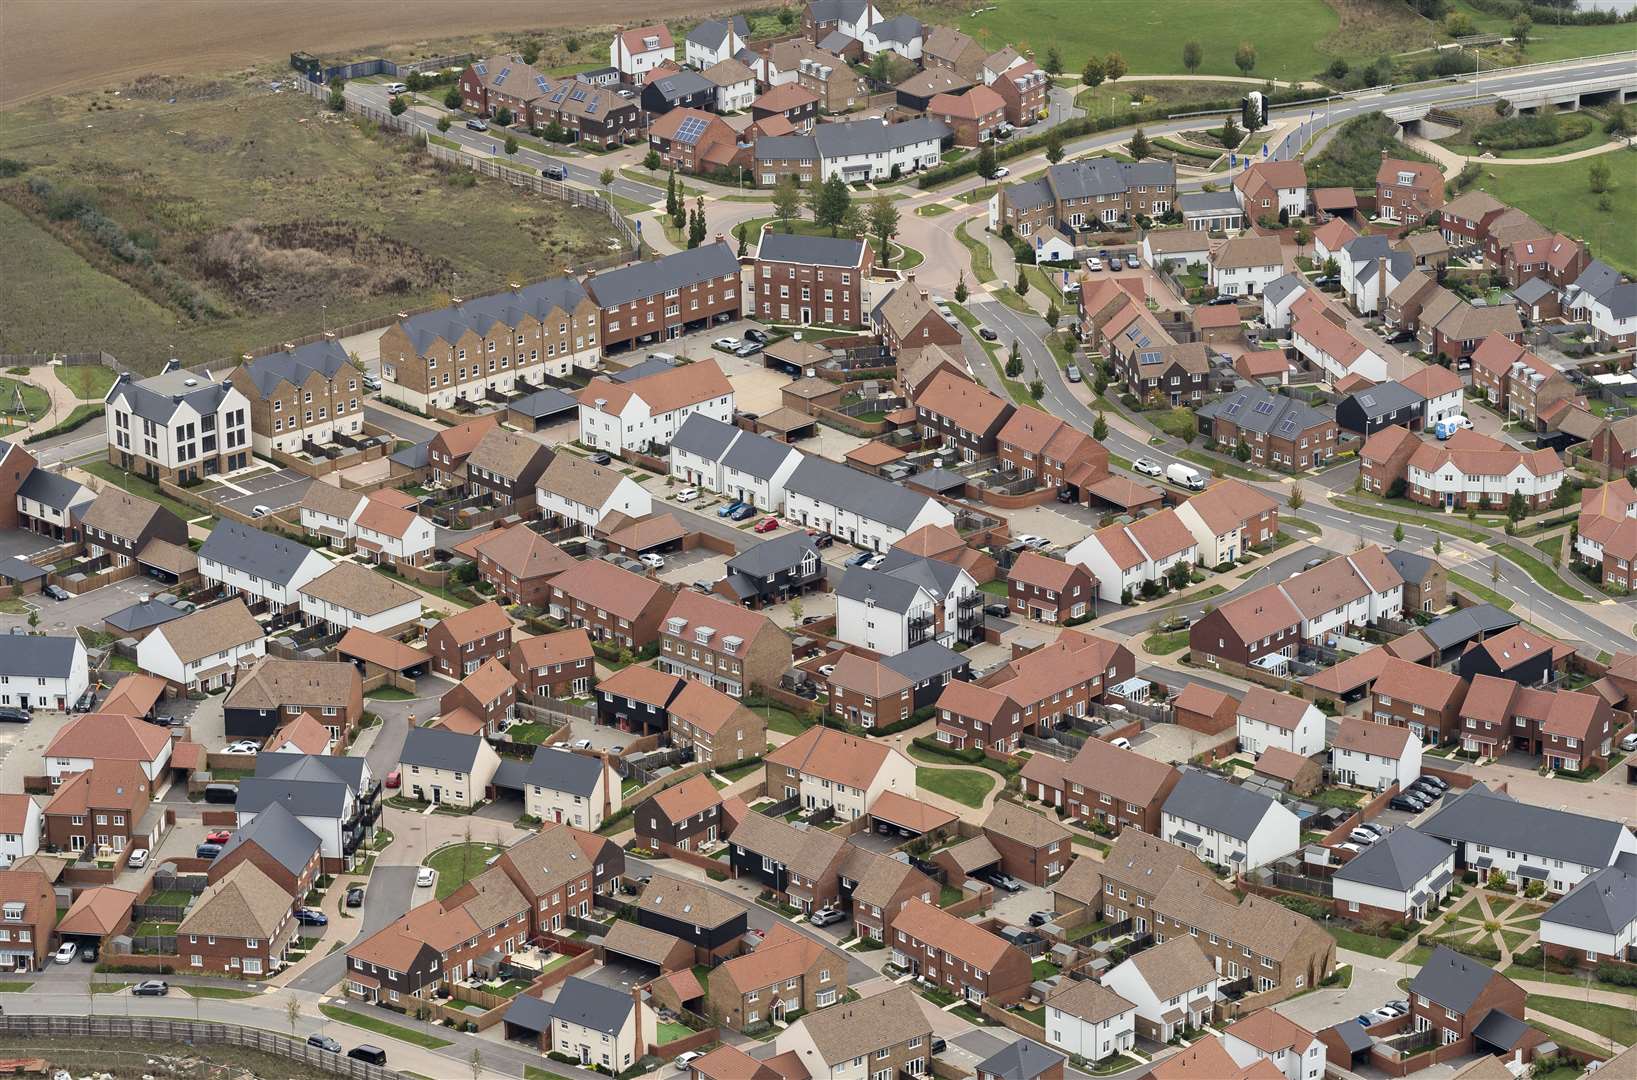 The Finberry housing development on the edge of Ashford. Picture: Ady Kerry/Ashford Borough Council